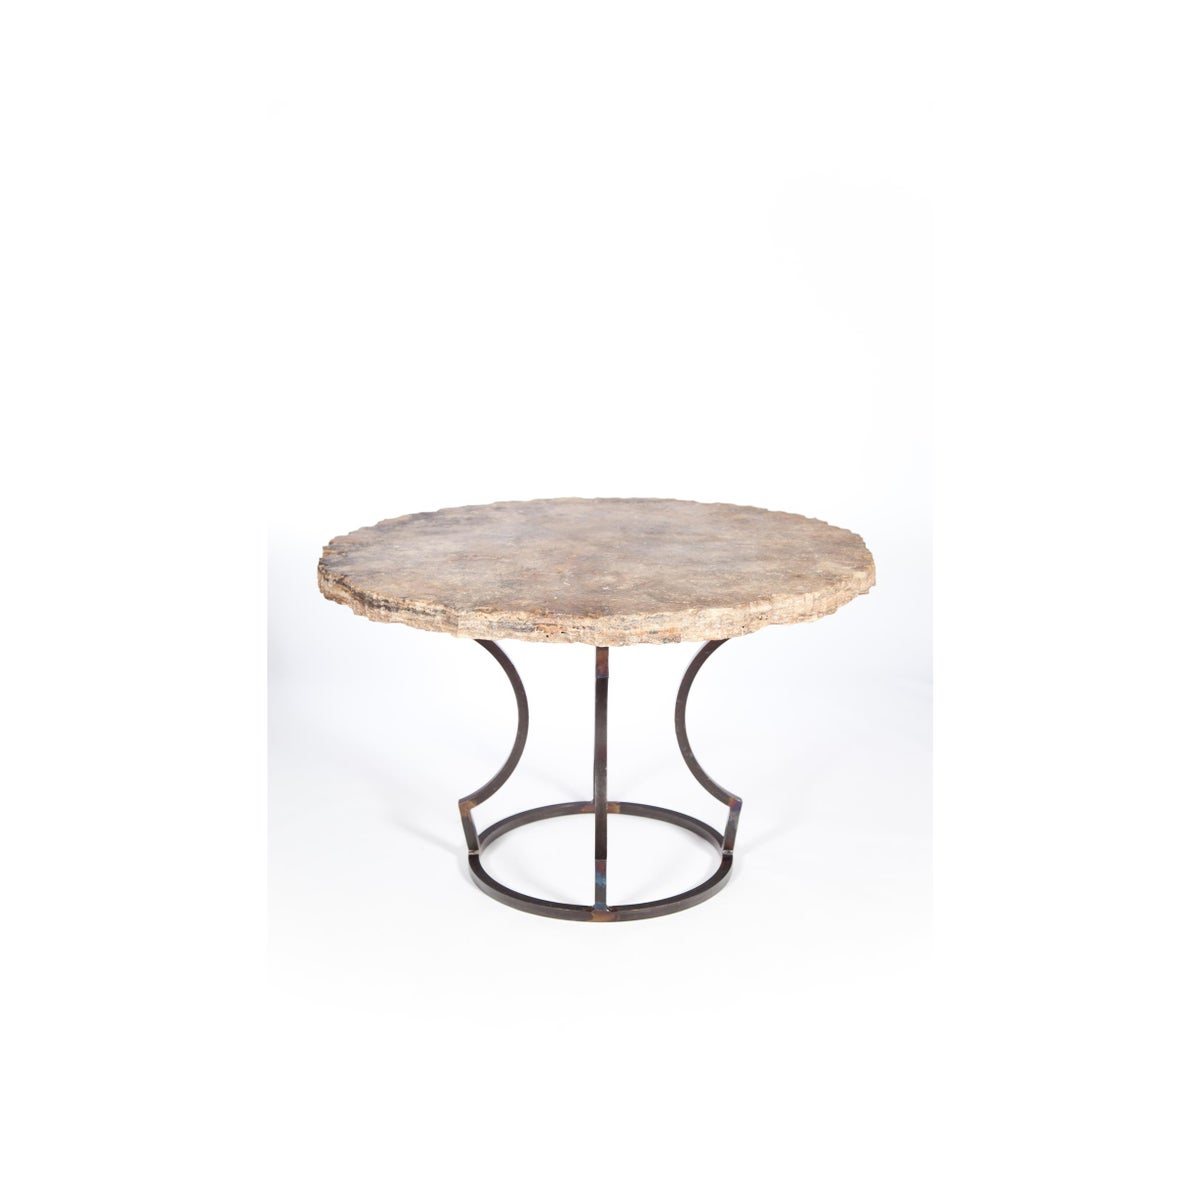 Charles Dining Table with 42" Round Live Edge Marble Top